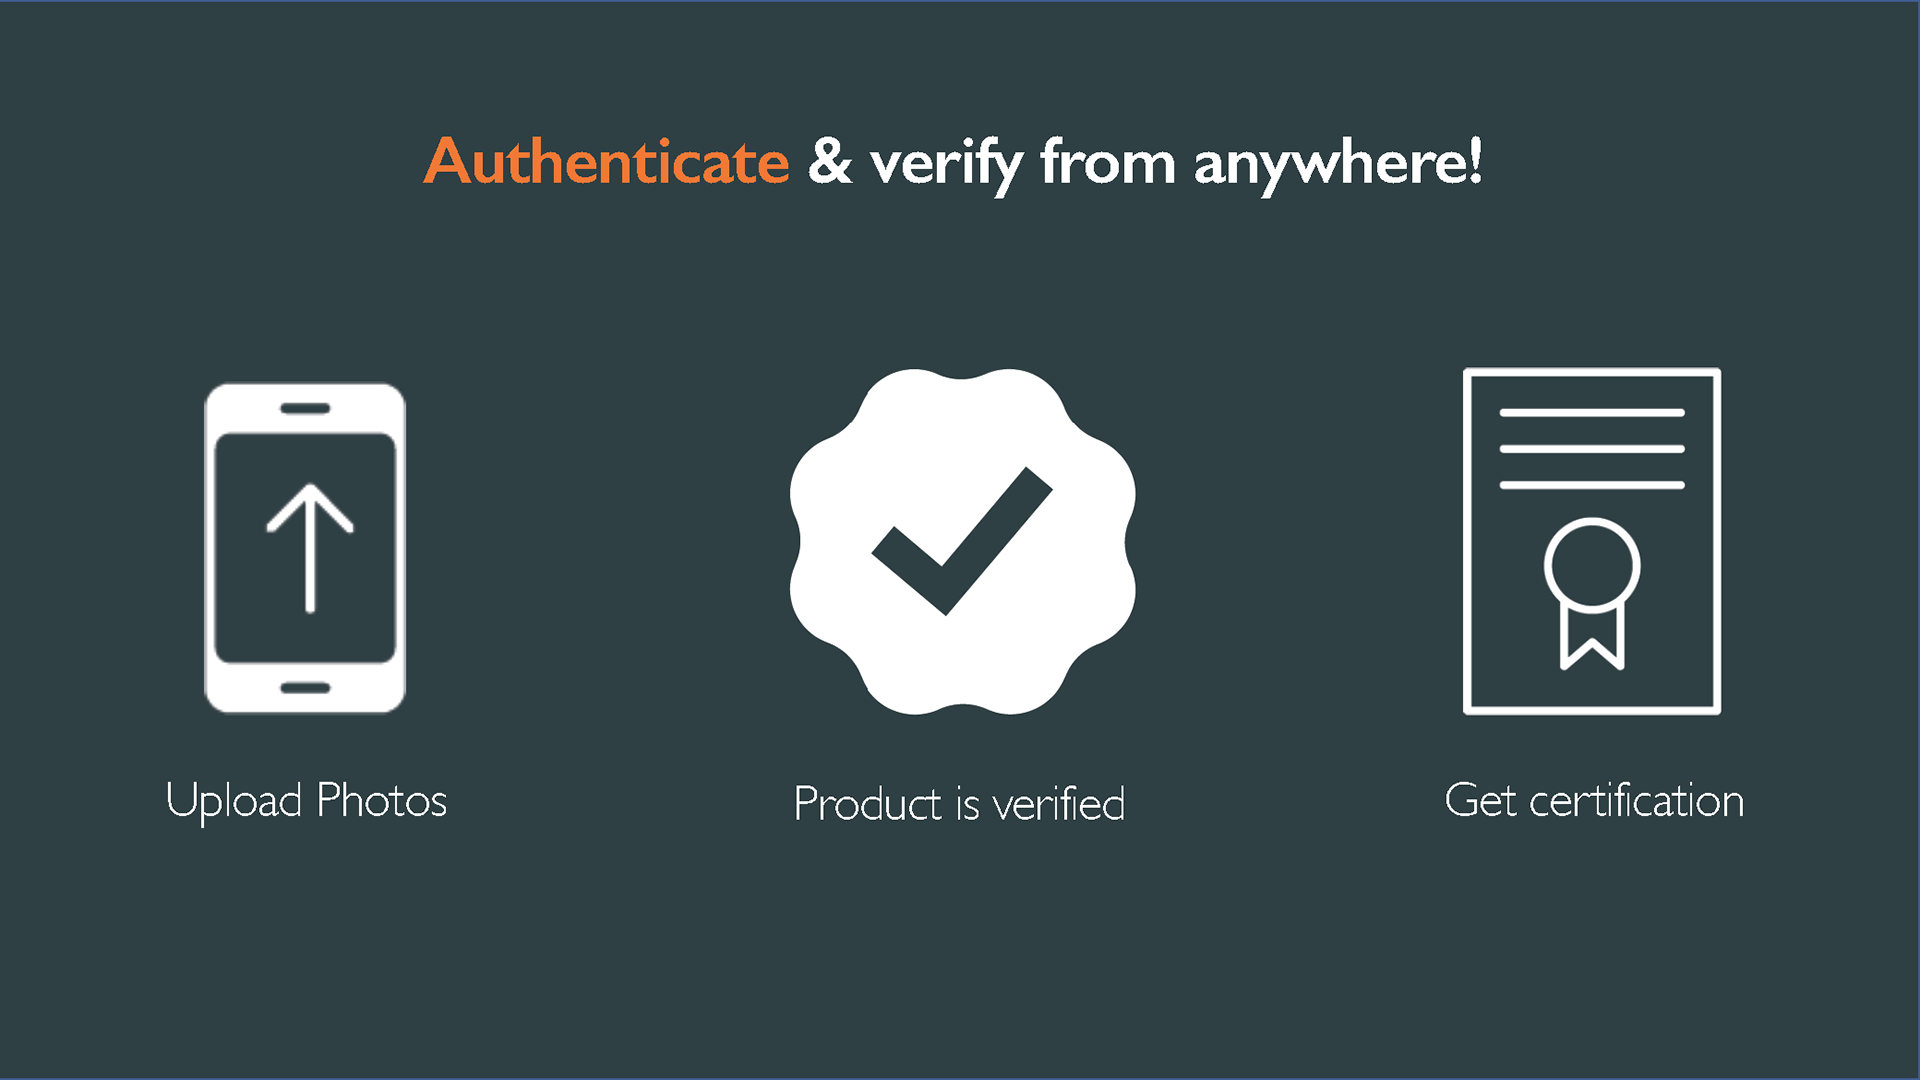 Authenticate and verify from anywhere